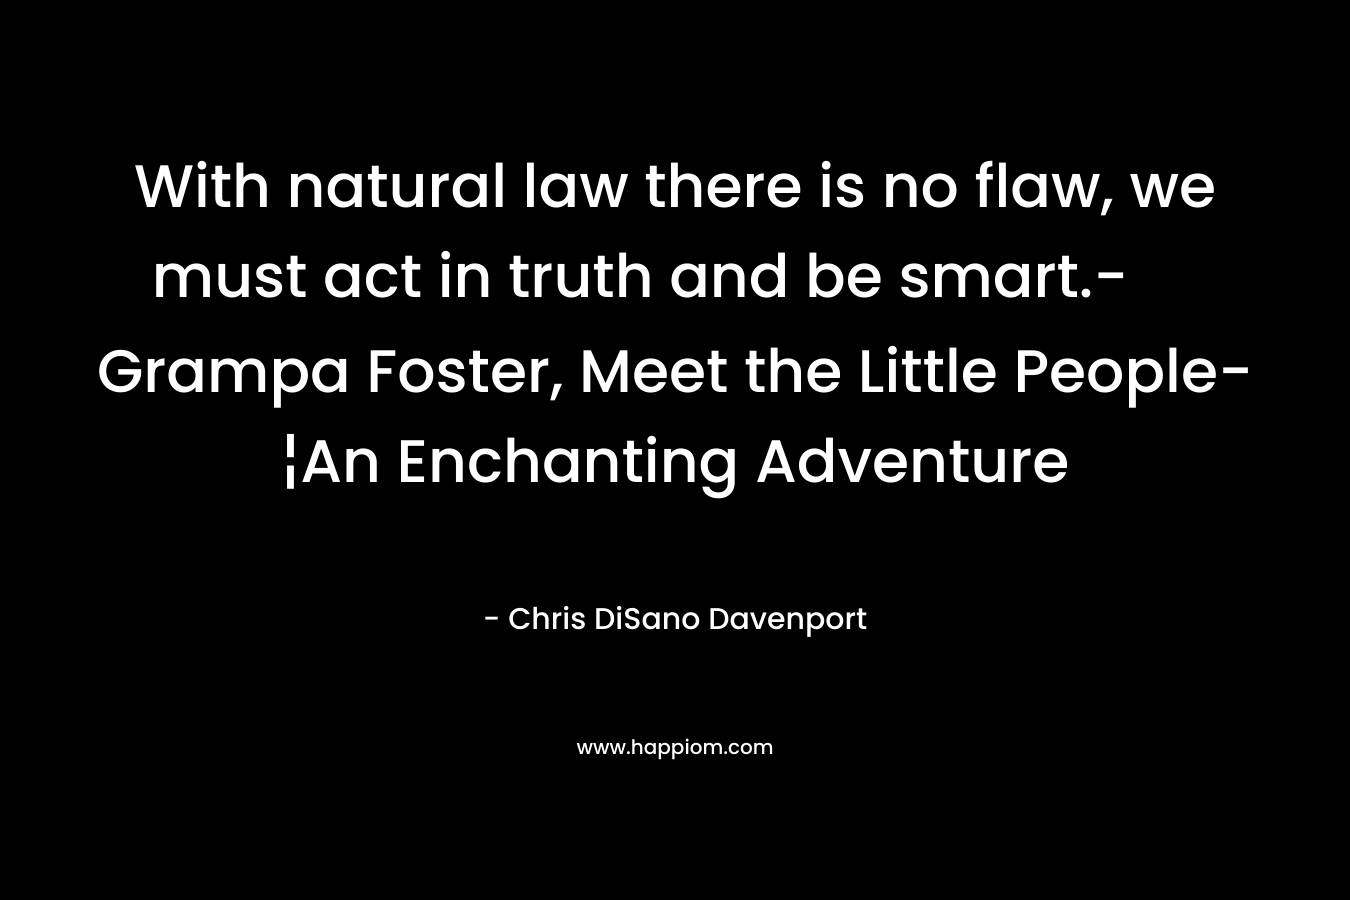 With natural law there is no flaw, we must act in truth and be smart.-Grampa Foster, Meet the Little People-¦An Enchanting Adventure – Chris DiSano Davenport